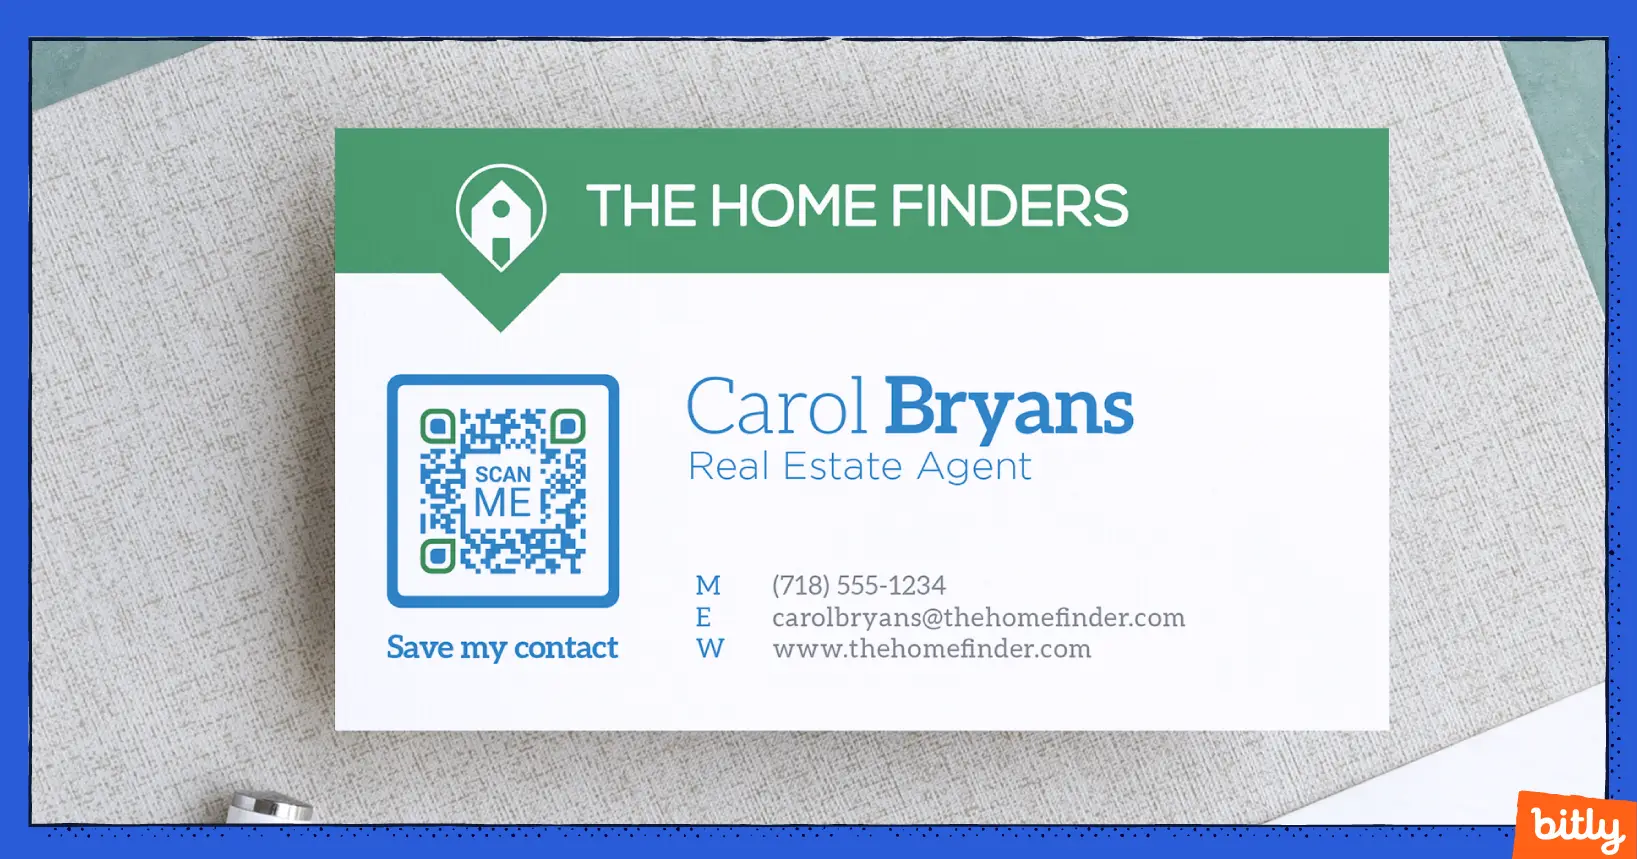 A business card for a real estate employee with their personal details and a QR Code and Save my contact call-to-action